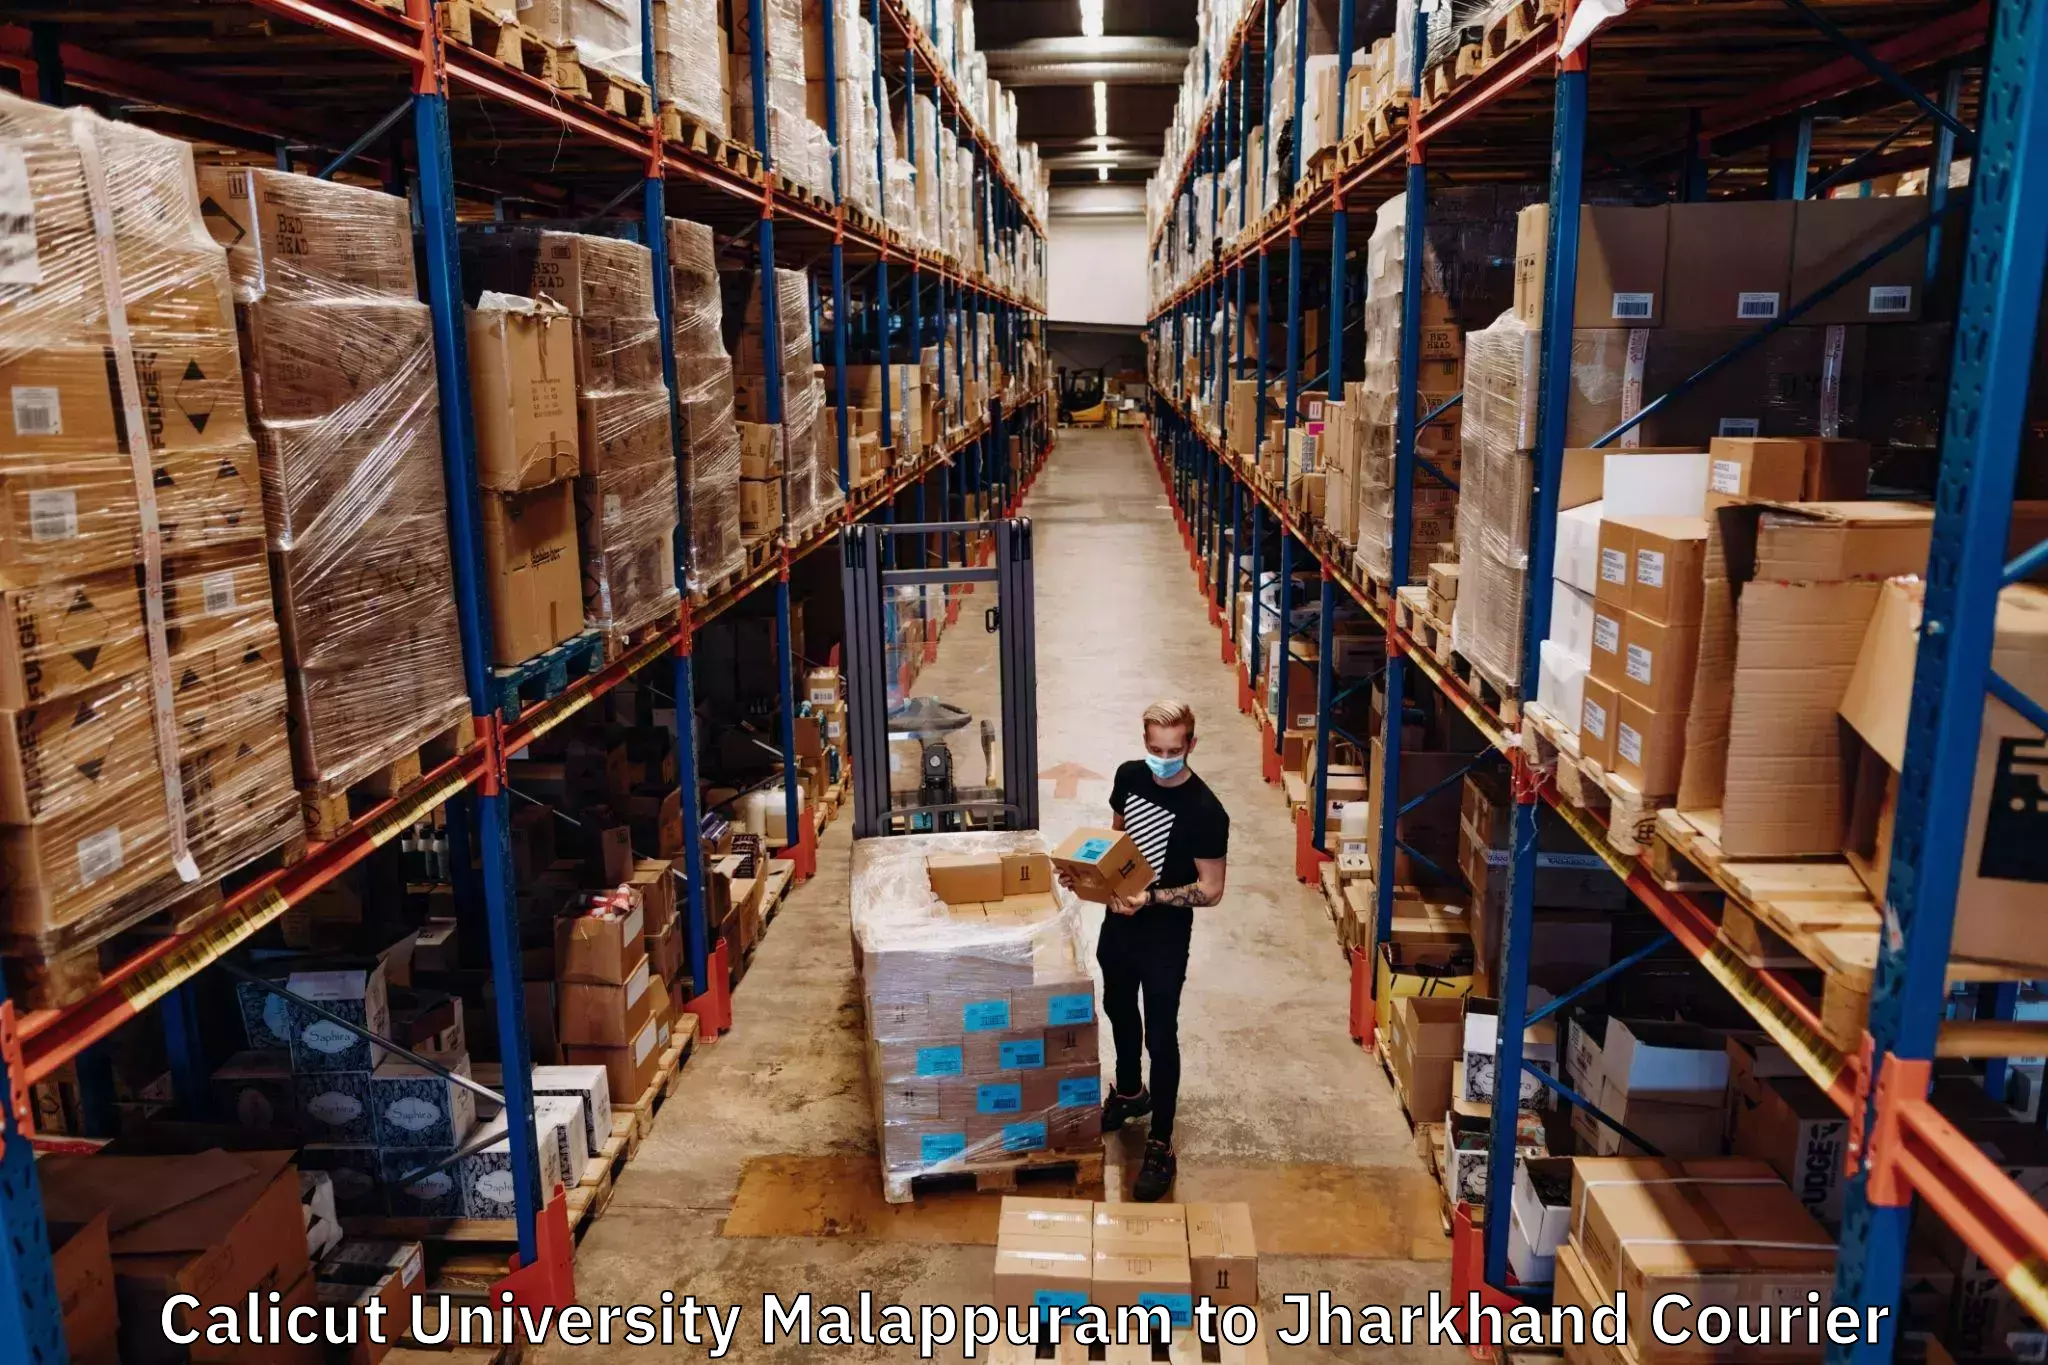 Reliable courier service in Calicut University Malappuram to Chandwa